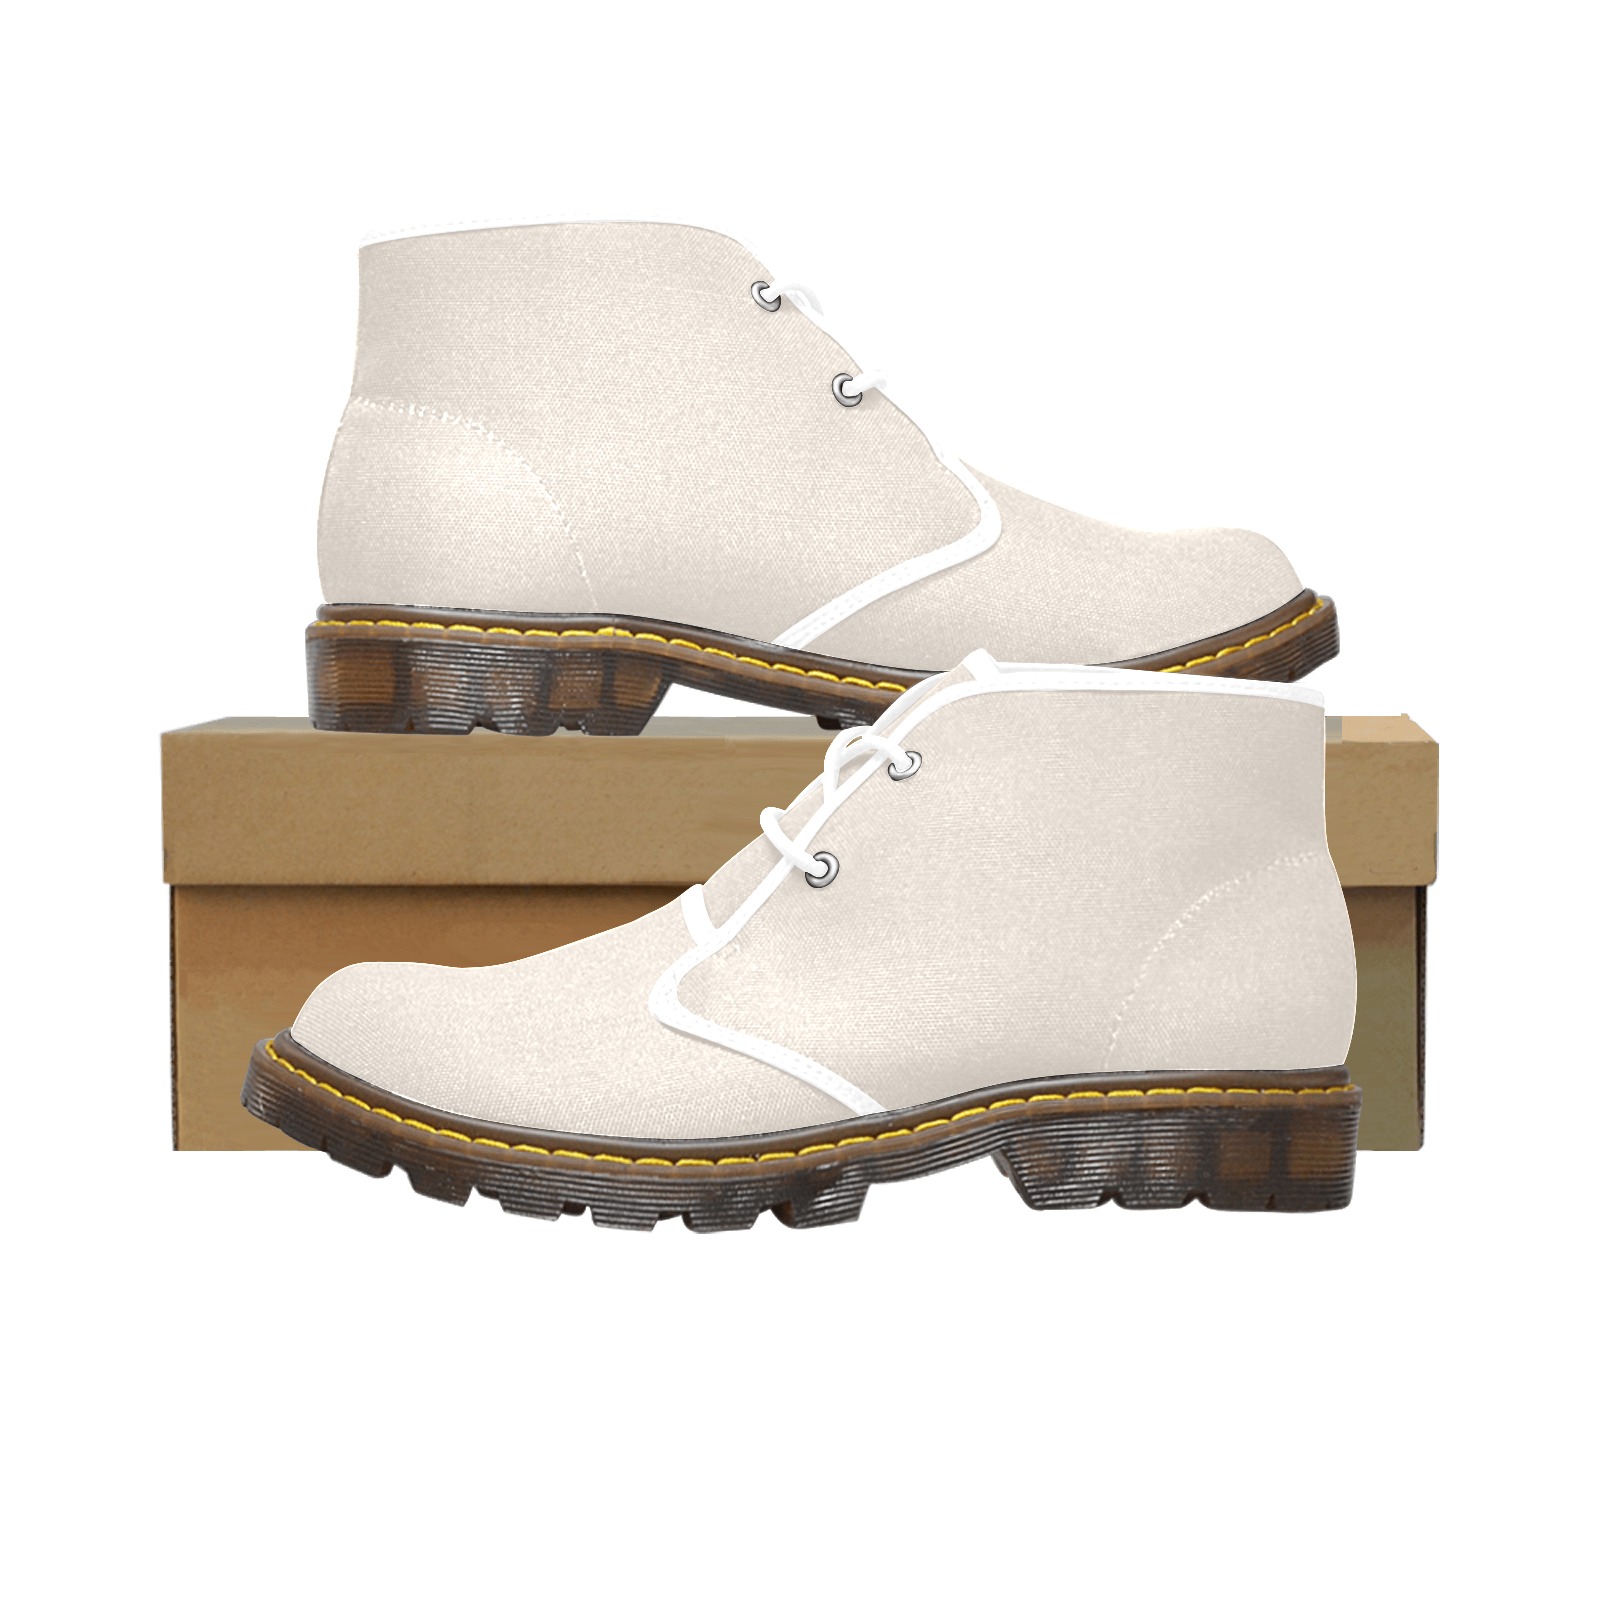 Perfectly Pale Women's Canvas Chukka Boots (Model 2402-1)